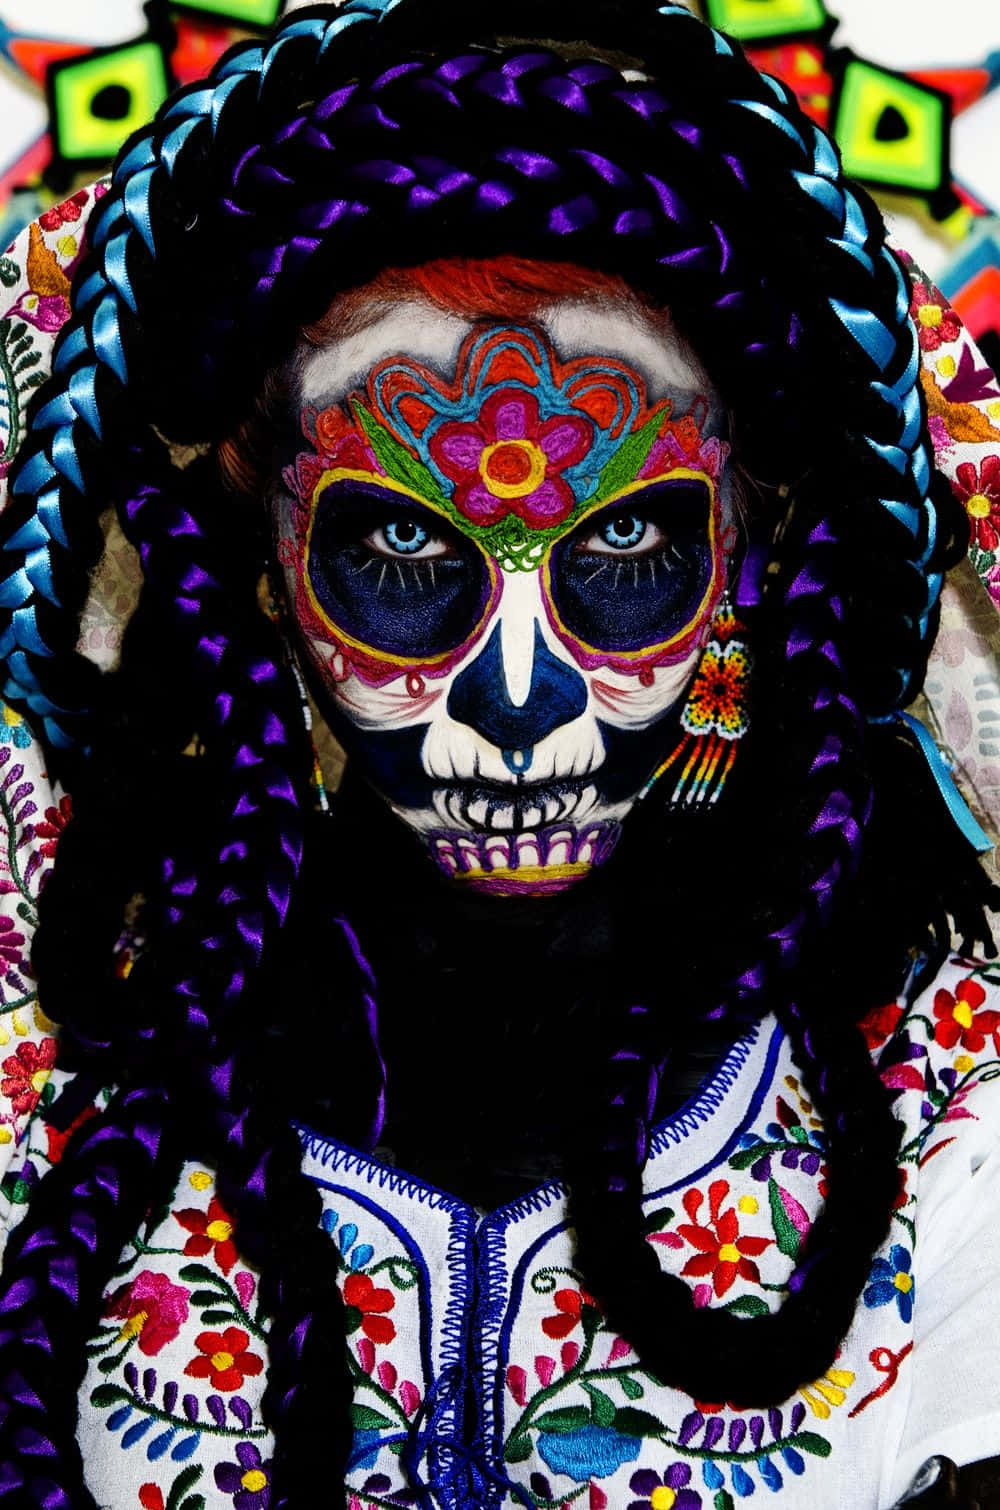 Vibrant and Colorful Day of the Dead Celebration